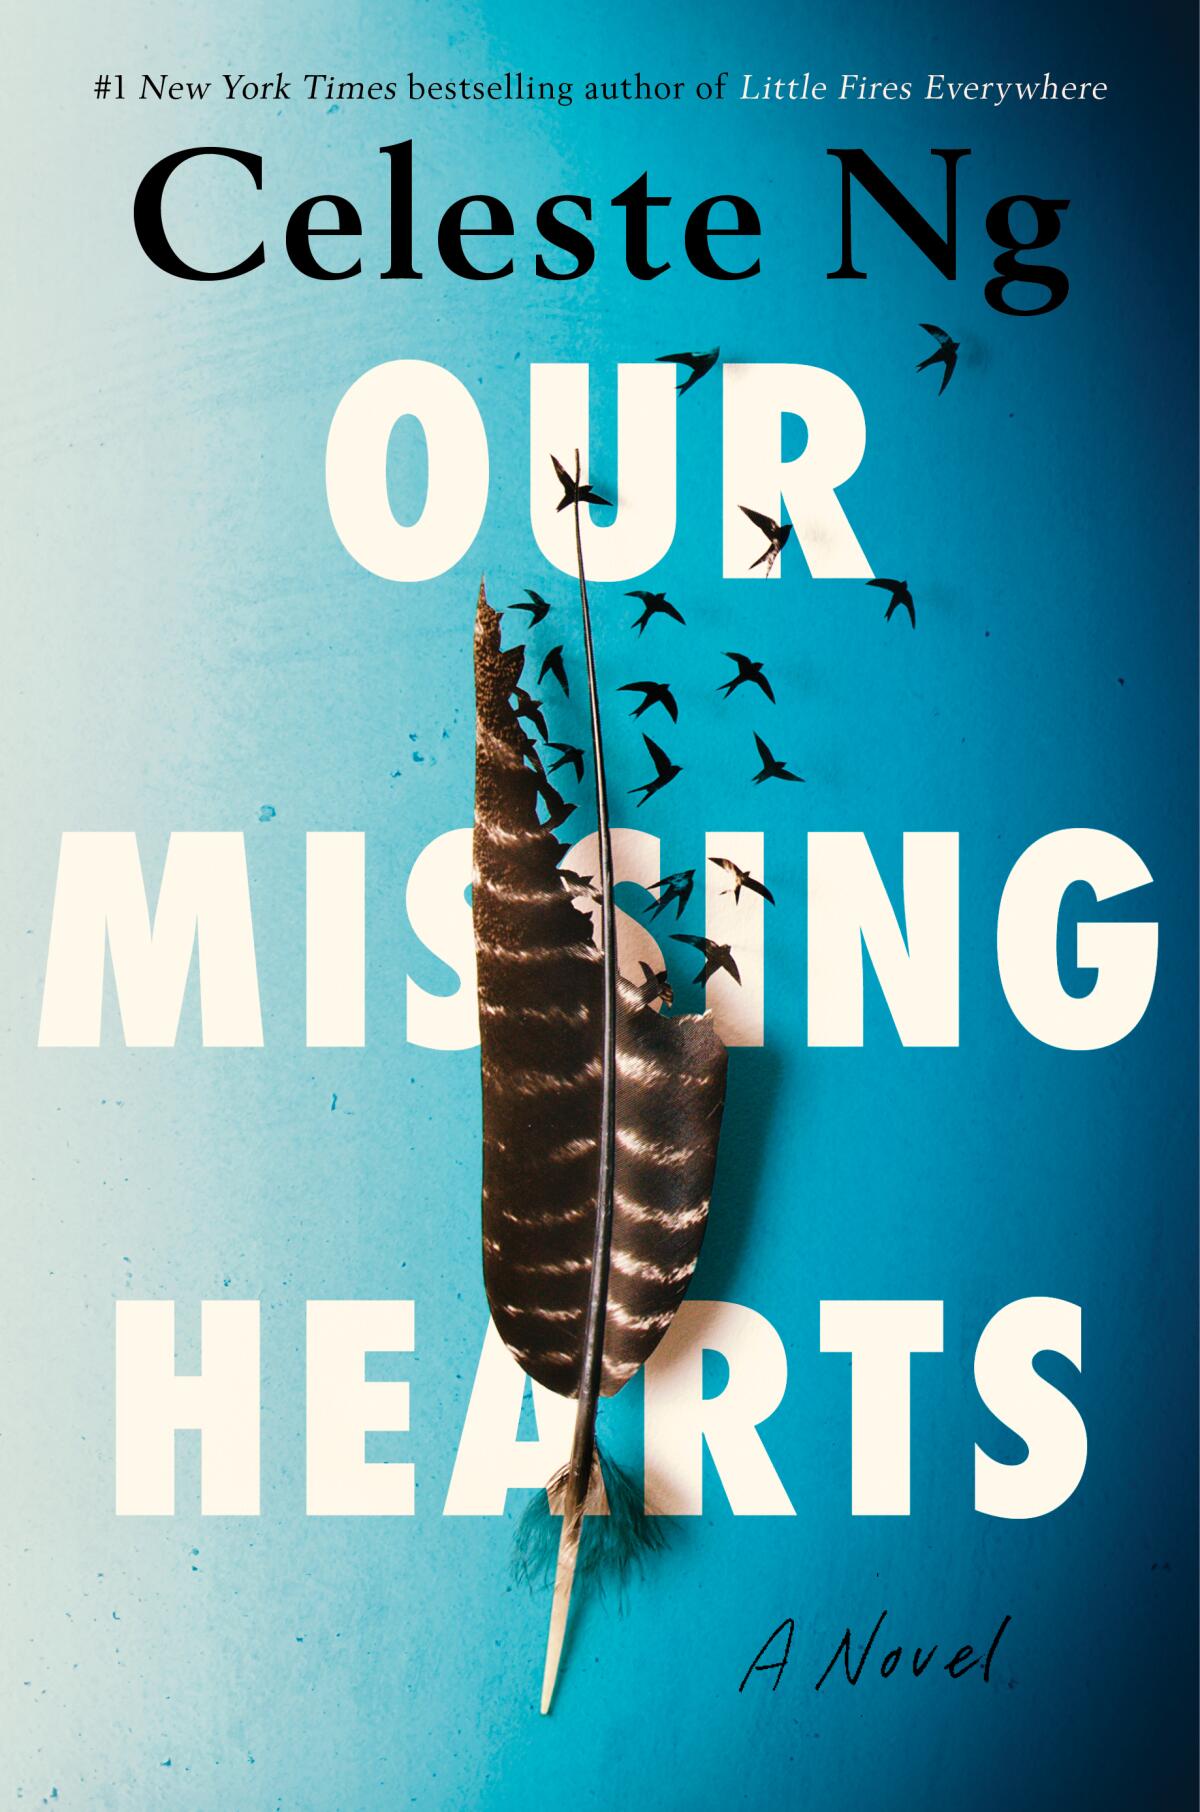 "Our Missing Hearts" by Celeste Ng